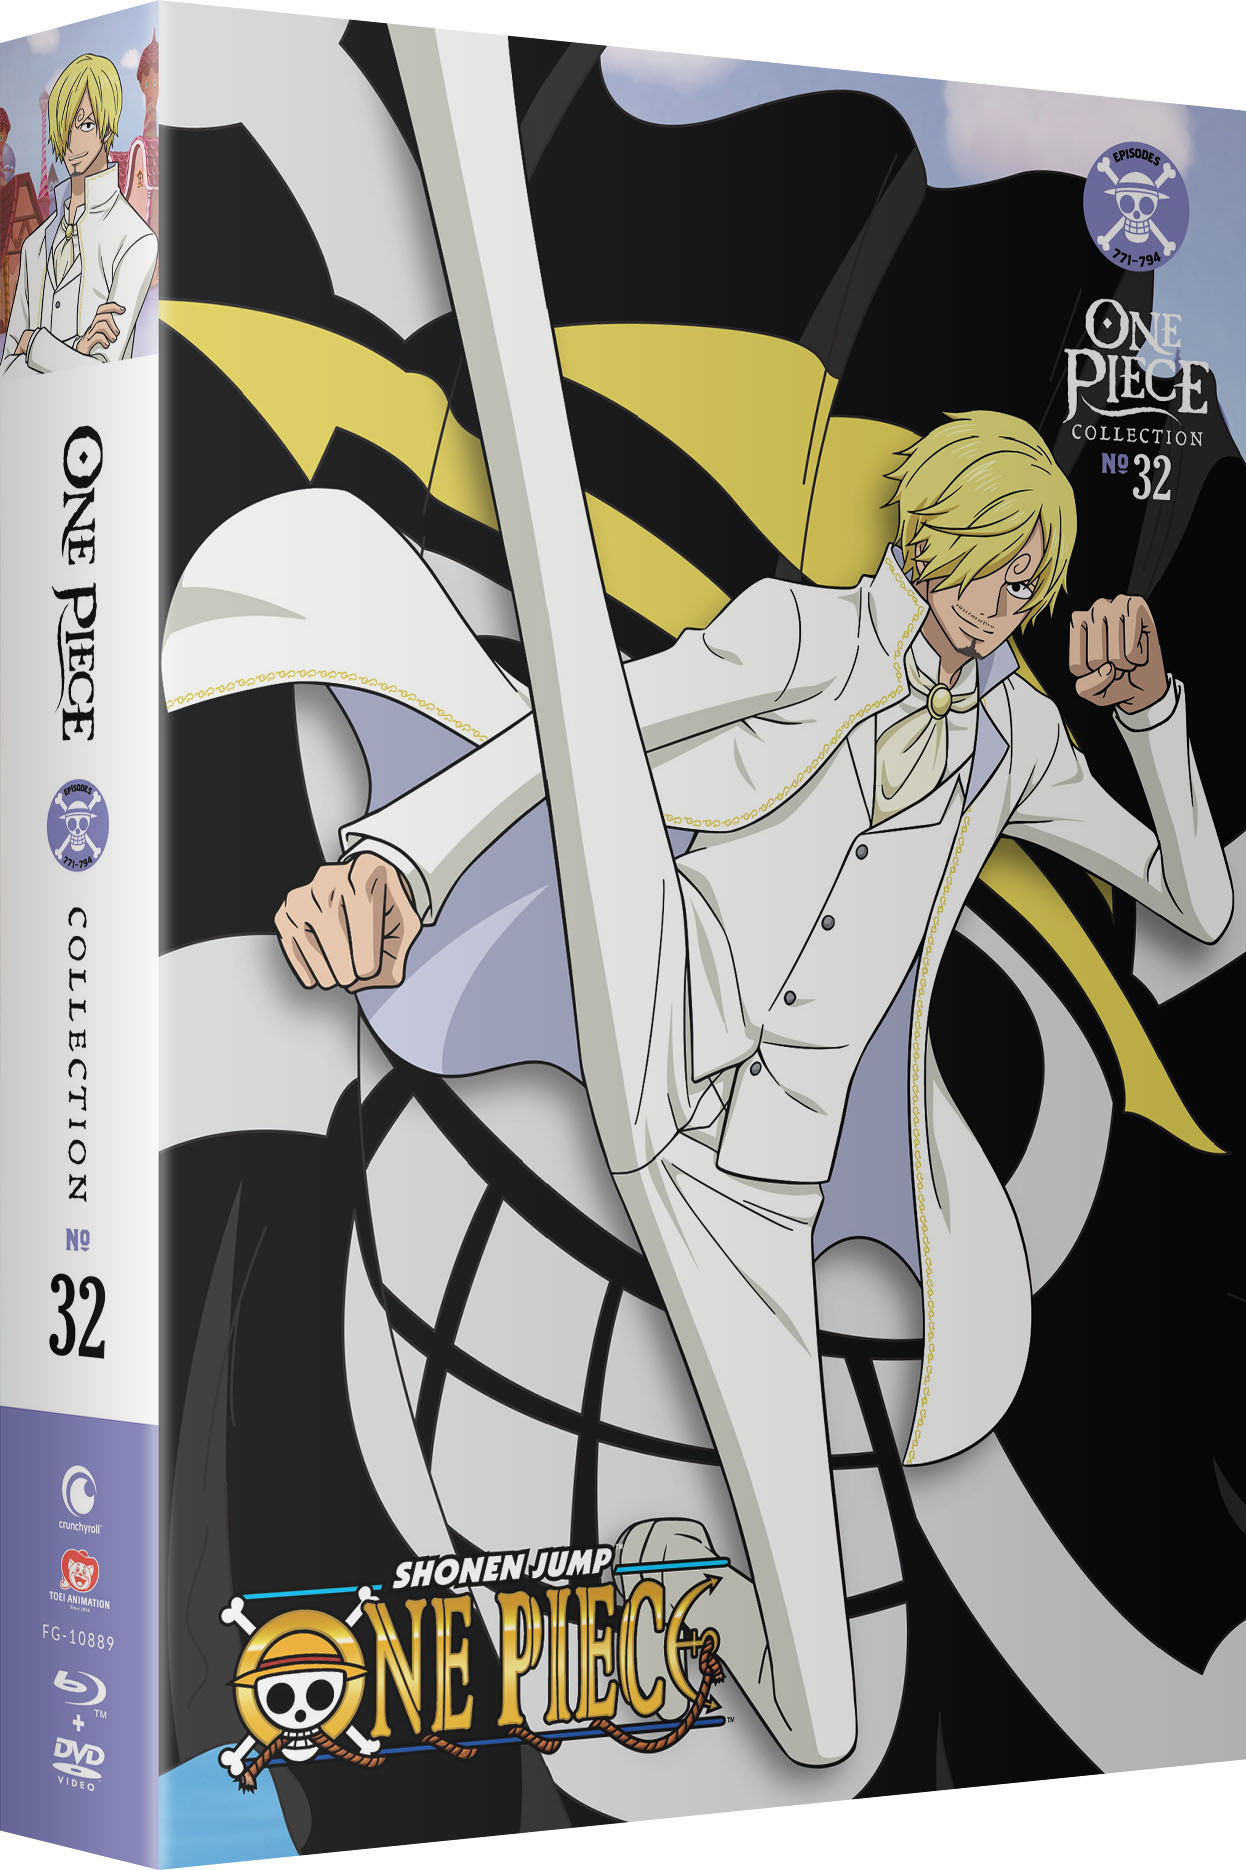 One Piece: Heart of Gold [Blu-ray] [2 Discs] - Best Buy